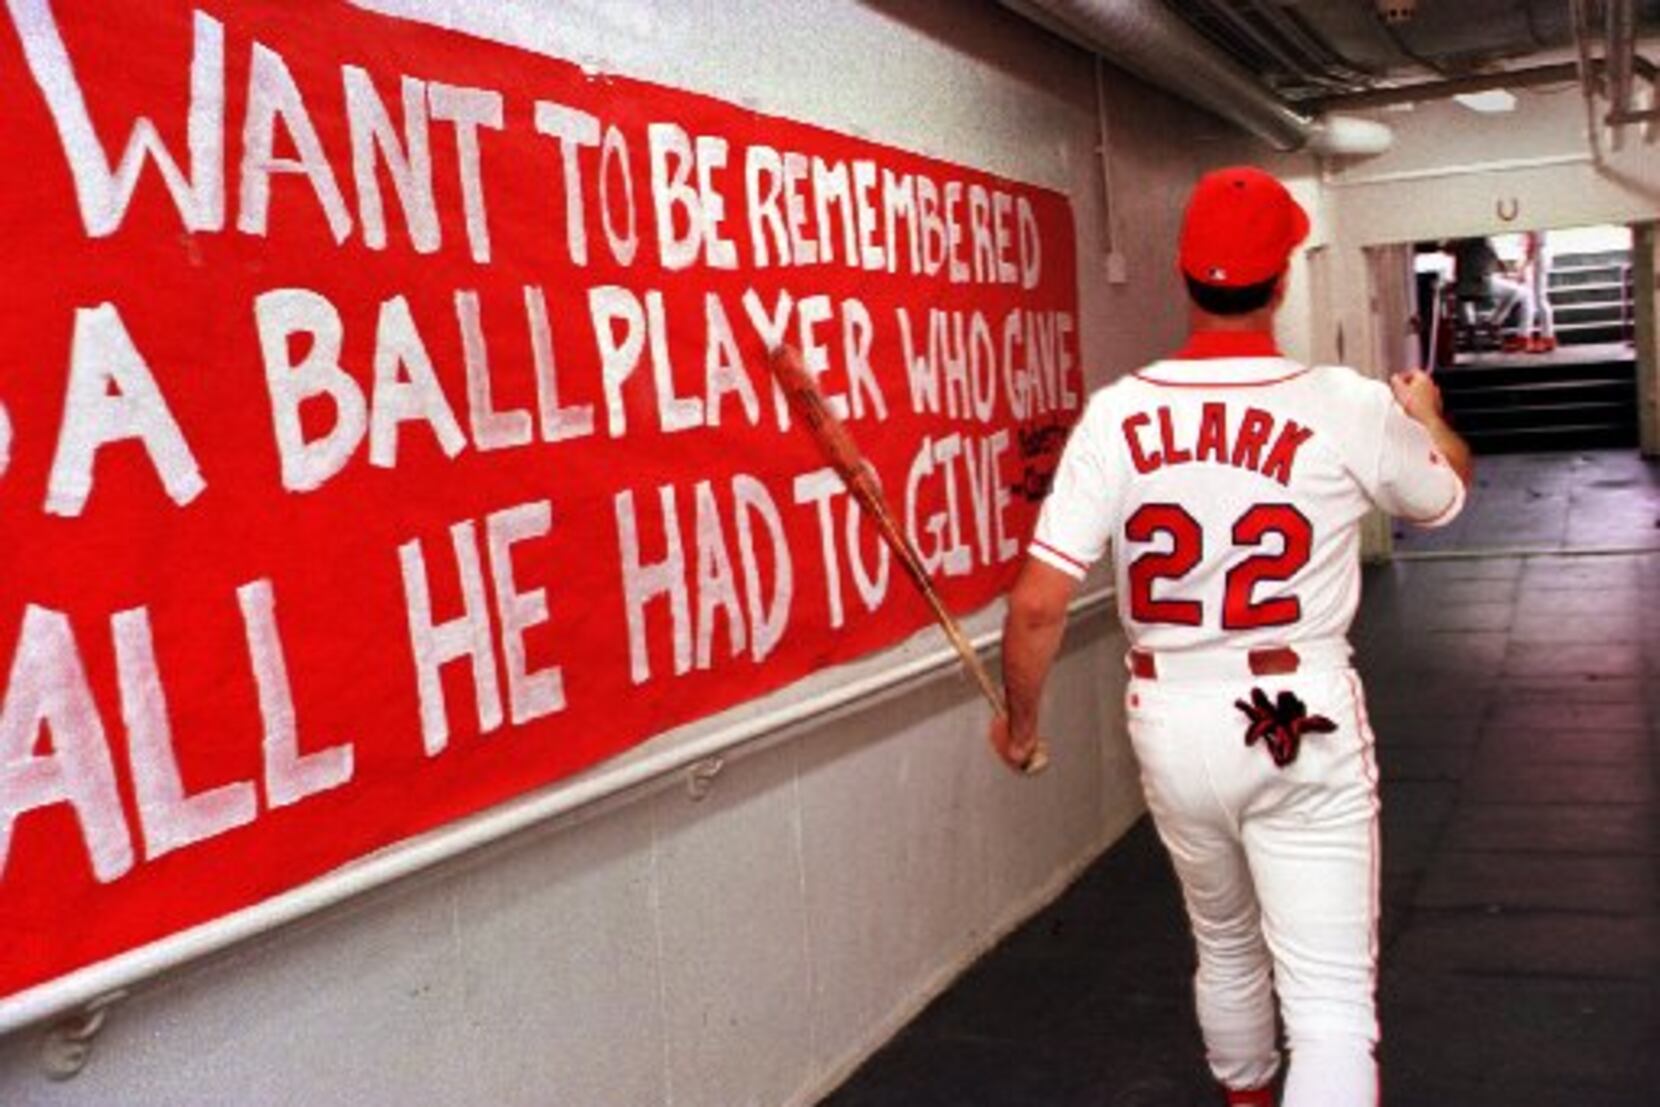 Will Clark considered in Hall of Fame vote